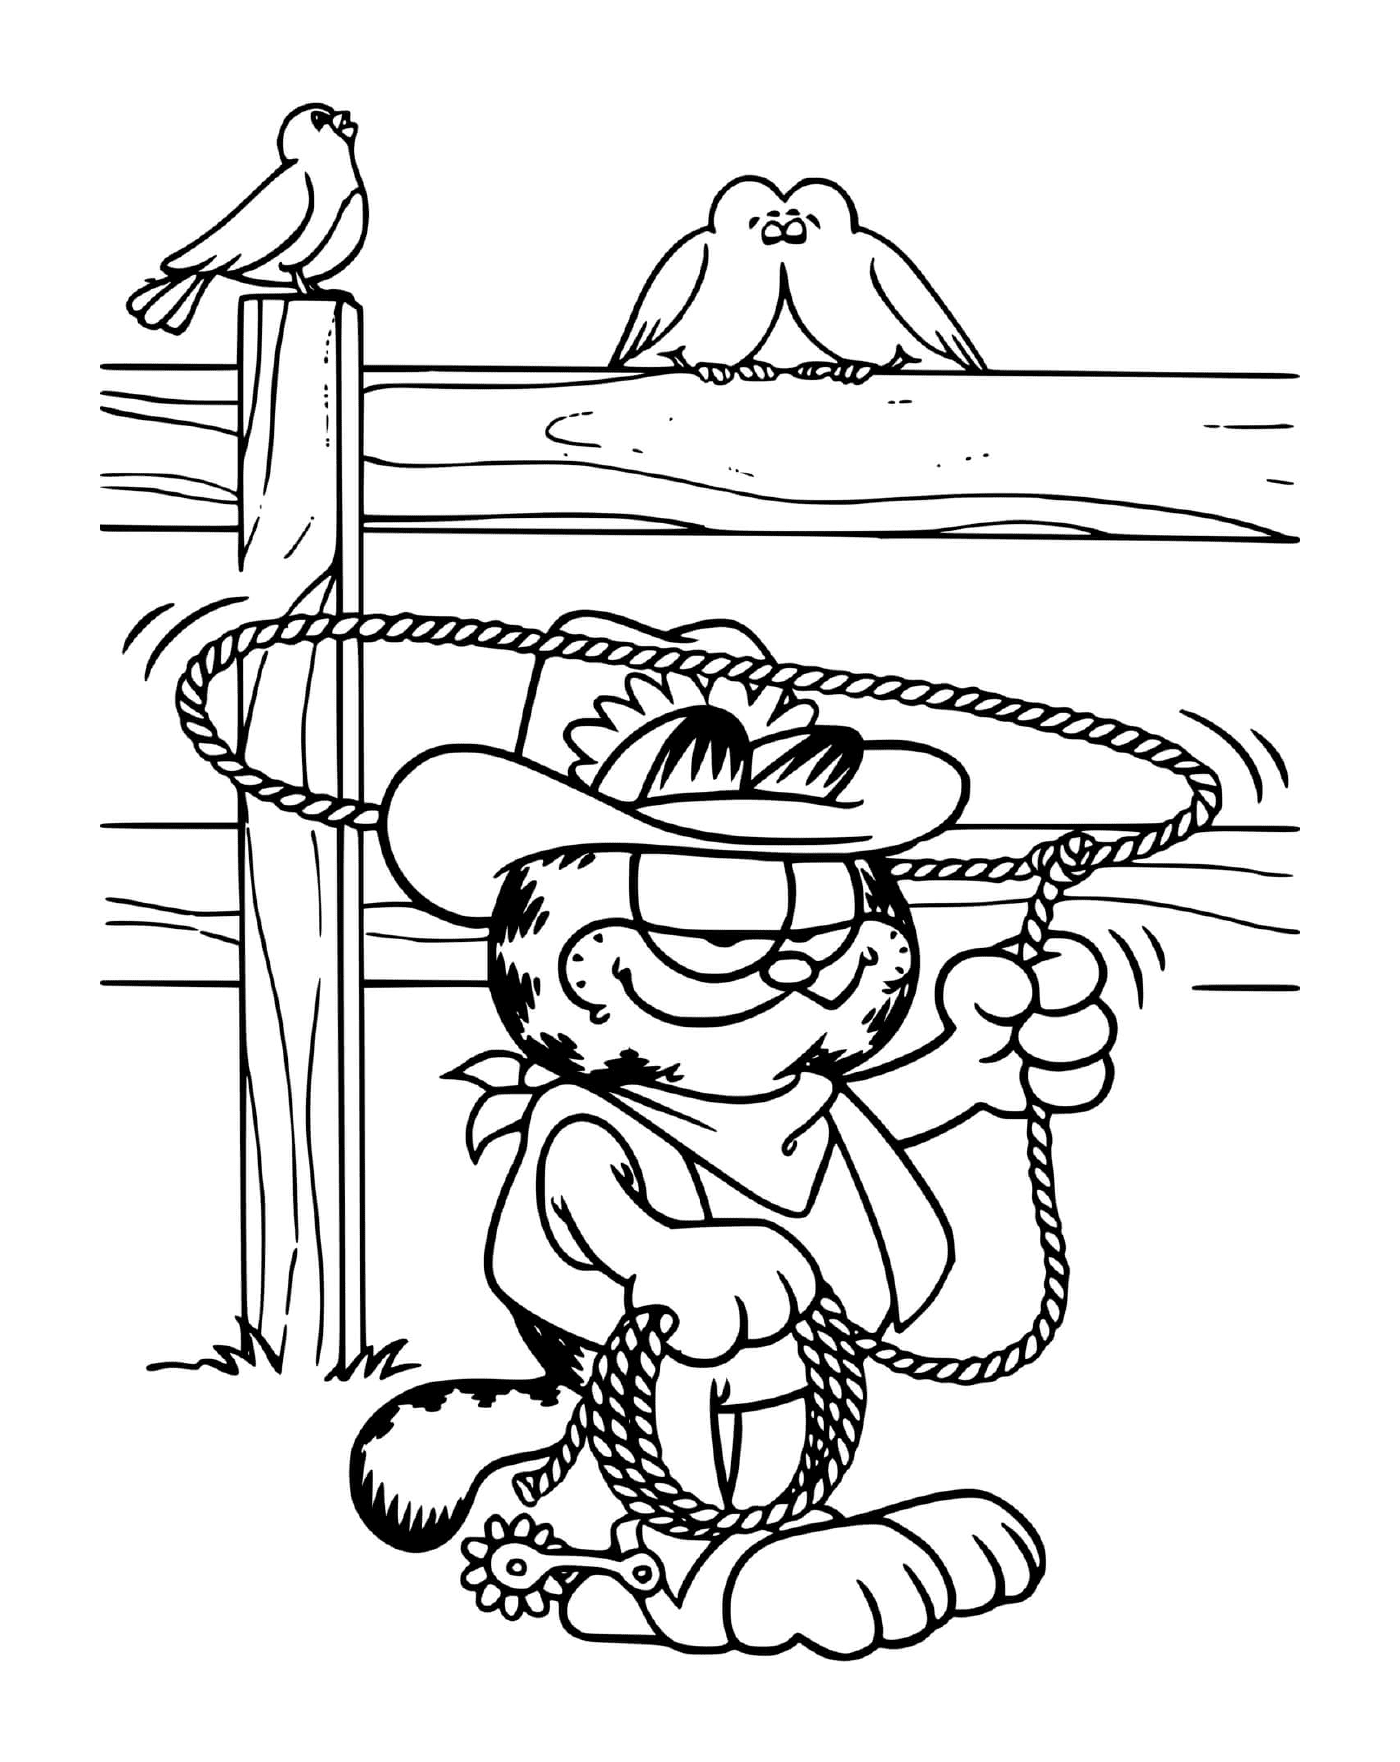  Garfield in cowboy with his lasso 